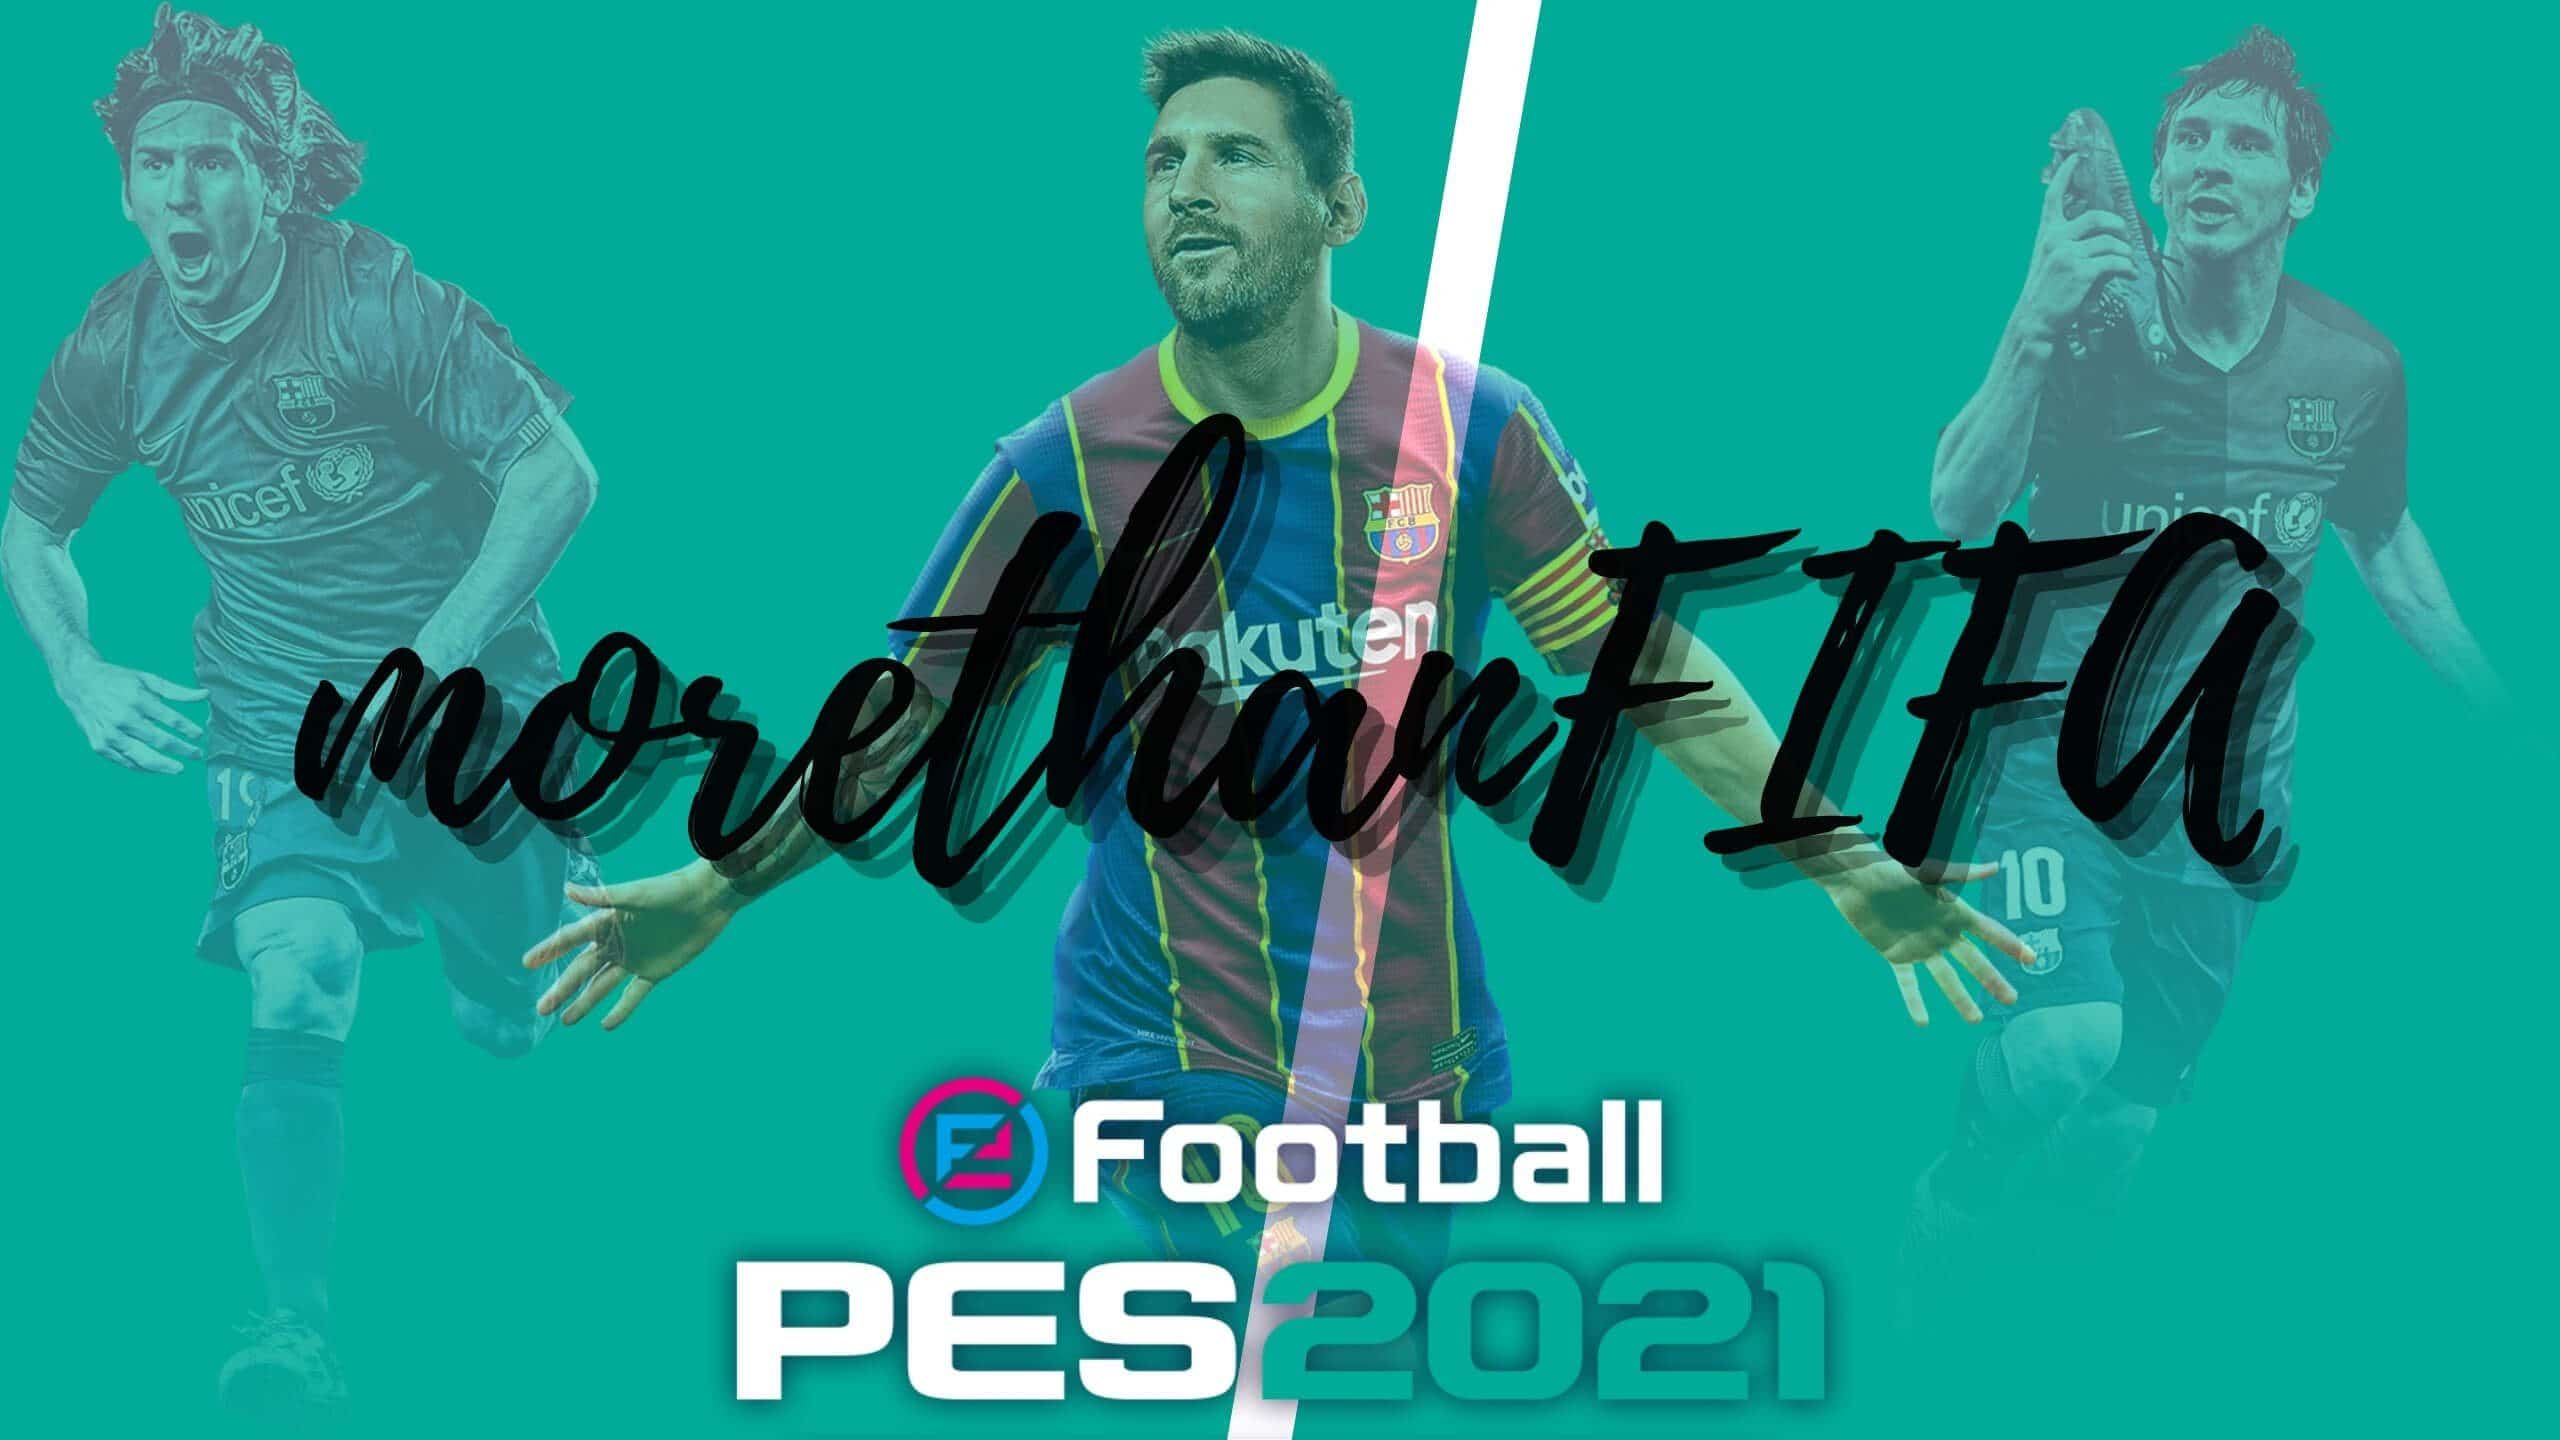 PES 2021 Patch PS4 morethanFIFA